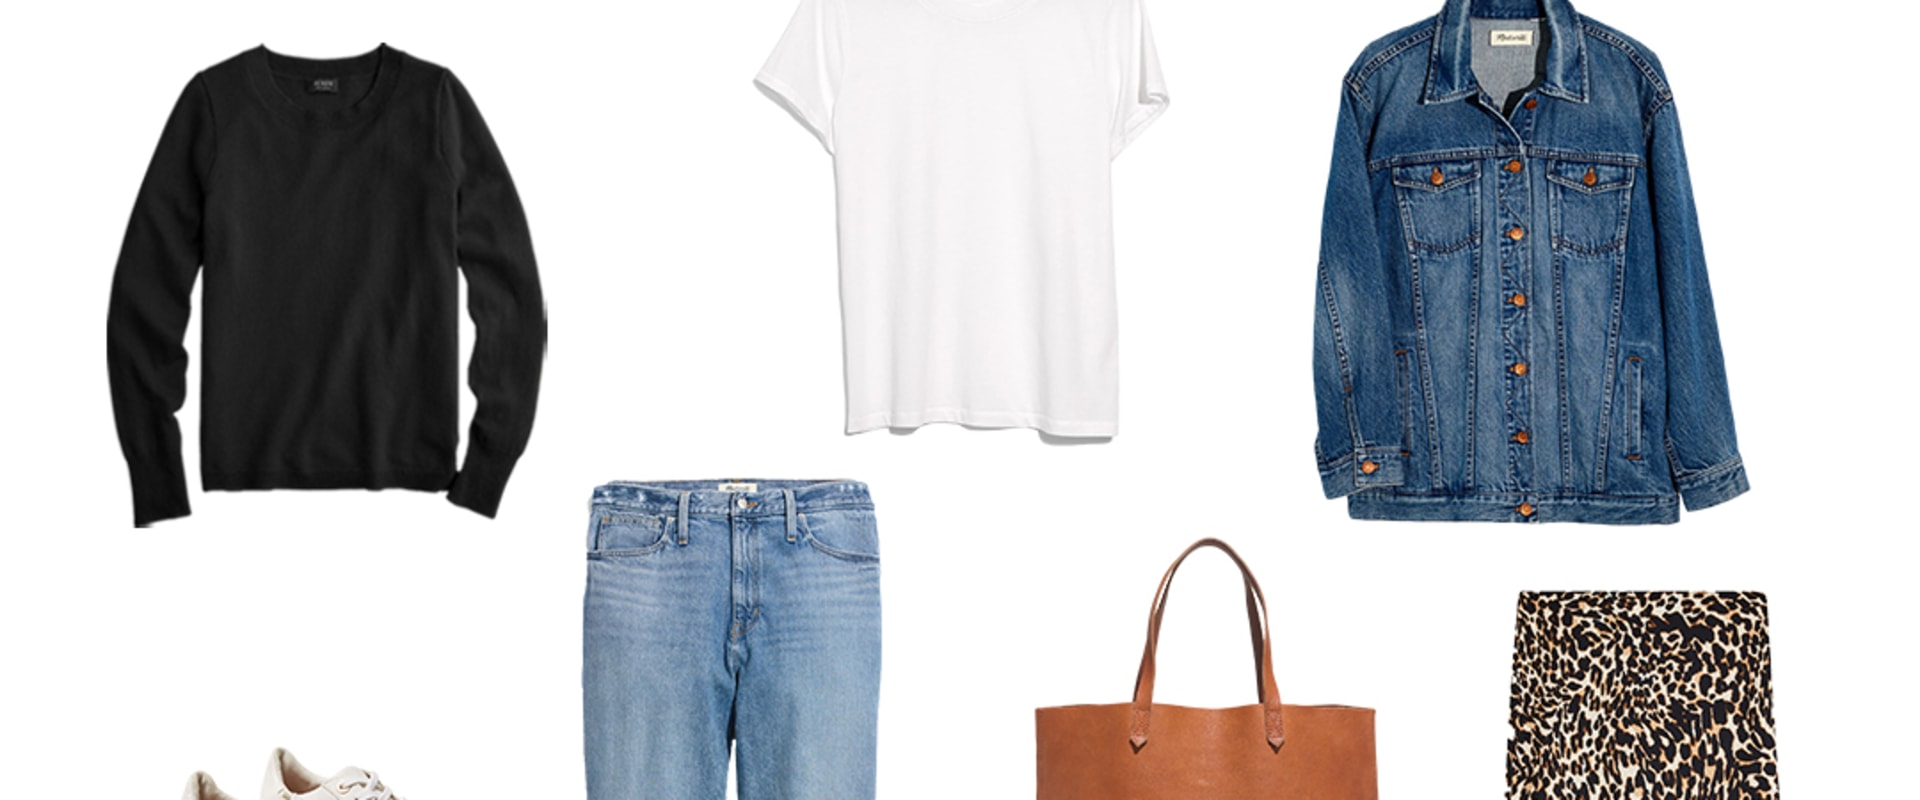 Chic Basics - How To Wear and where to find them in Charleston